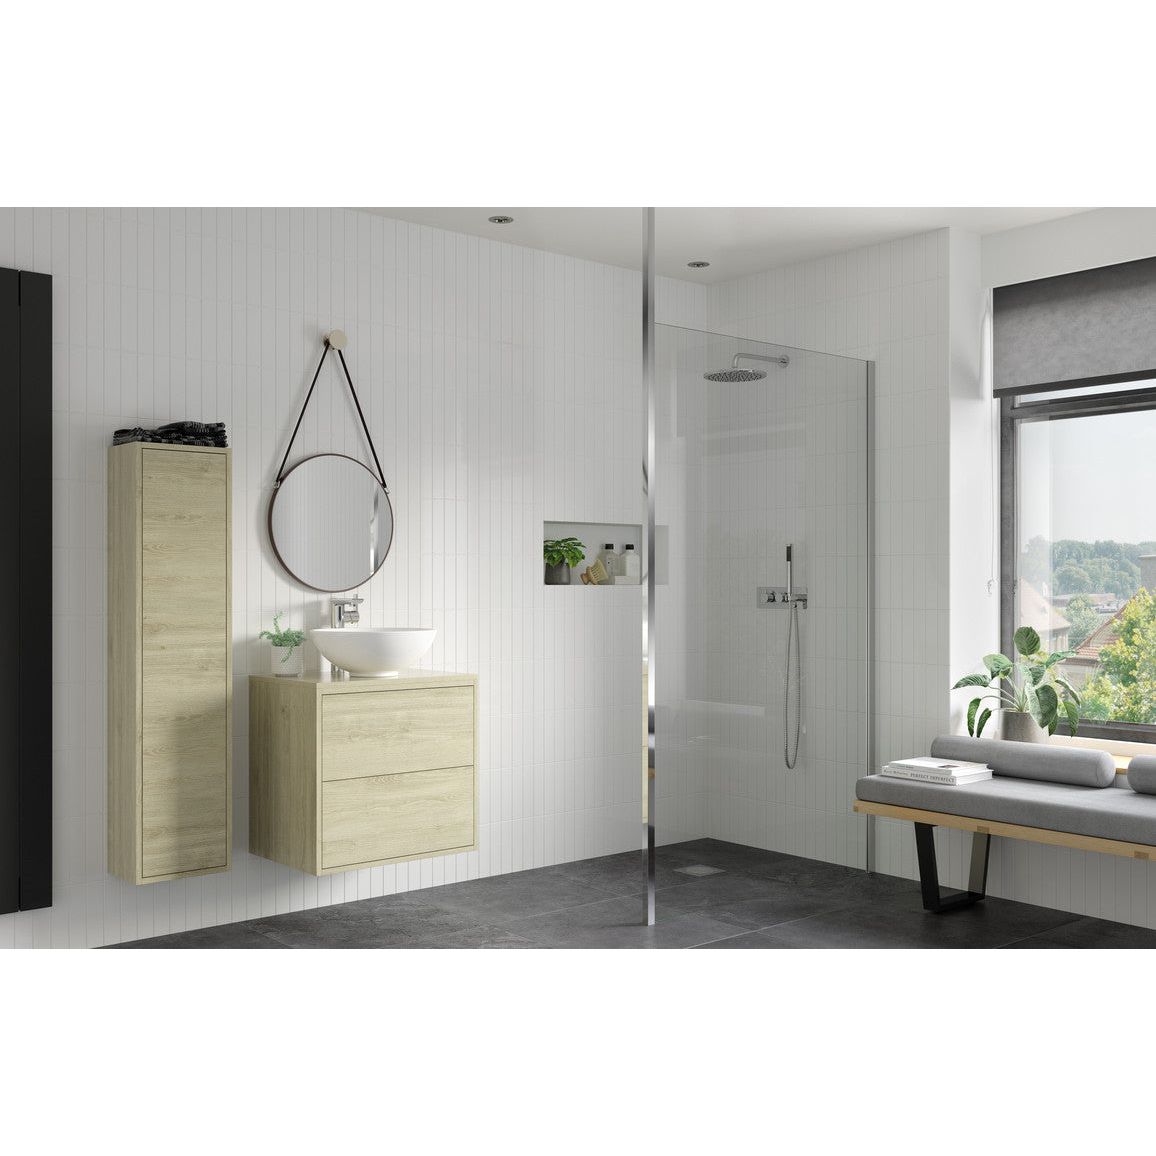 Montague 1000mm Wetroom Panel & Floor-to-Ceiling Pole - Chrome